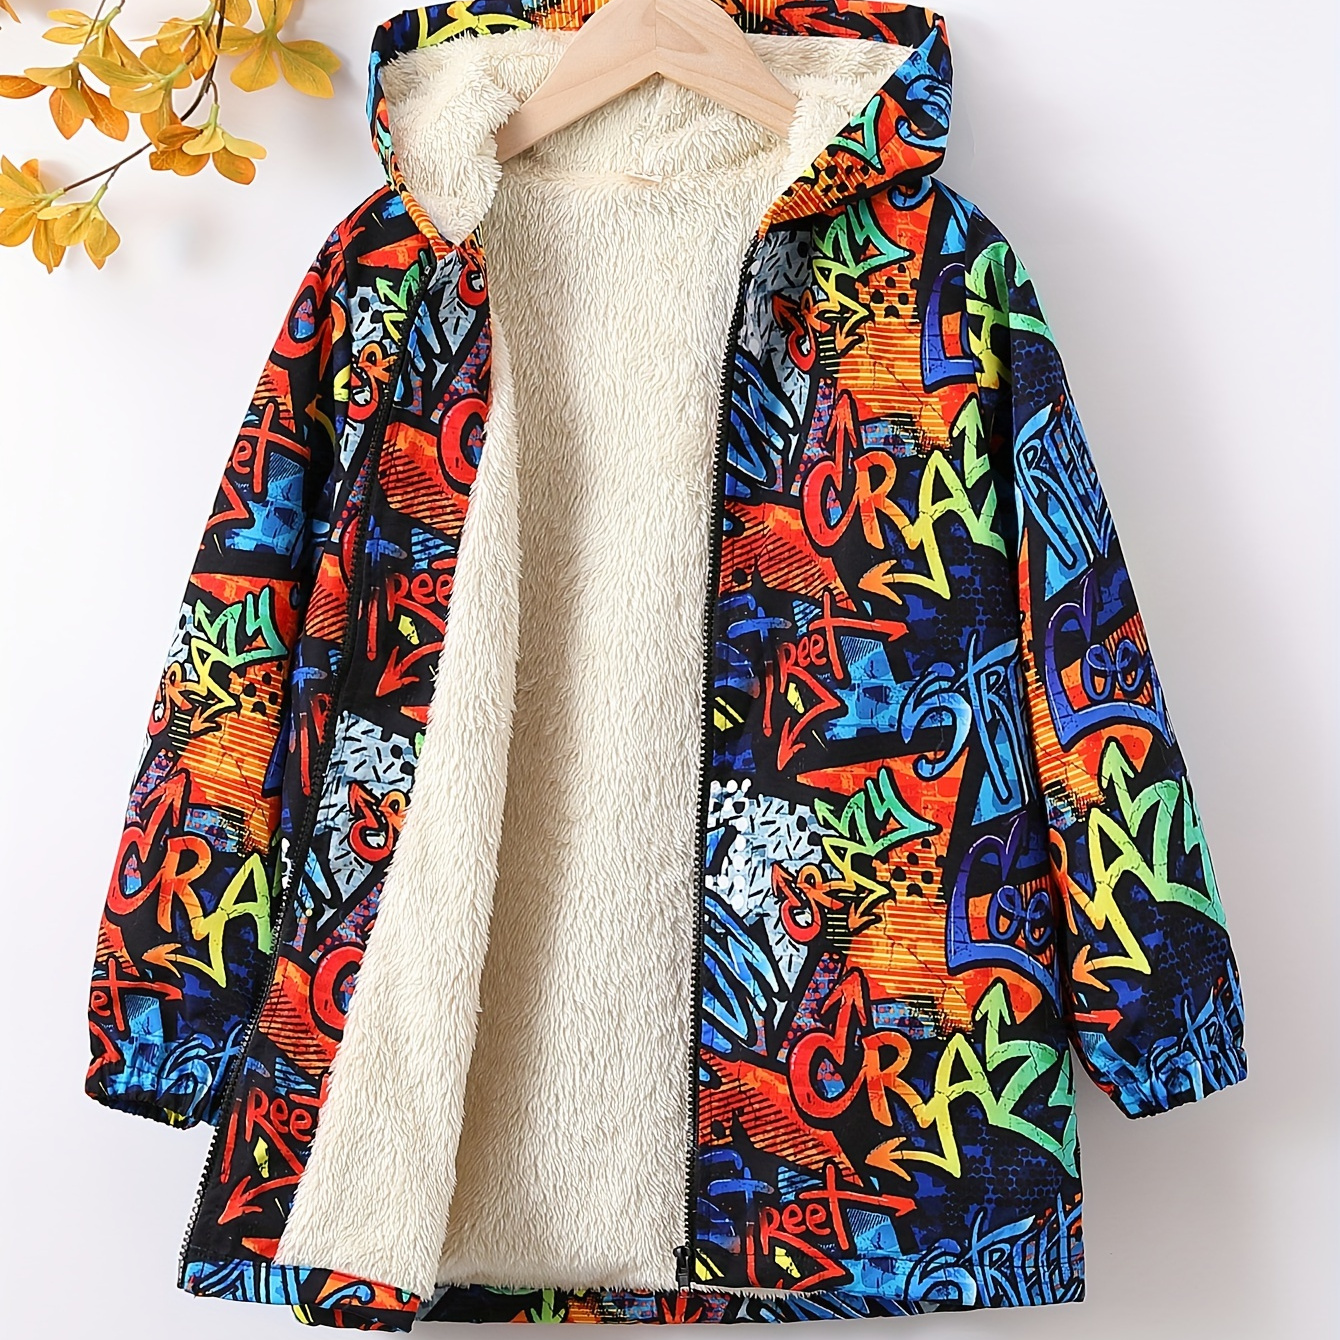 

Kid's "crazy" Graffiti Pattern Fleece Lining Coat, Warm Zip Up Hooded Jacket, Boy's Clothes For Winter Fall Outdoor